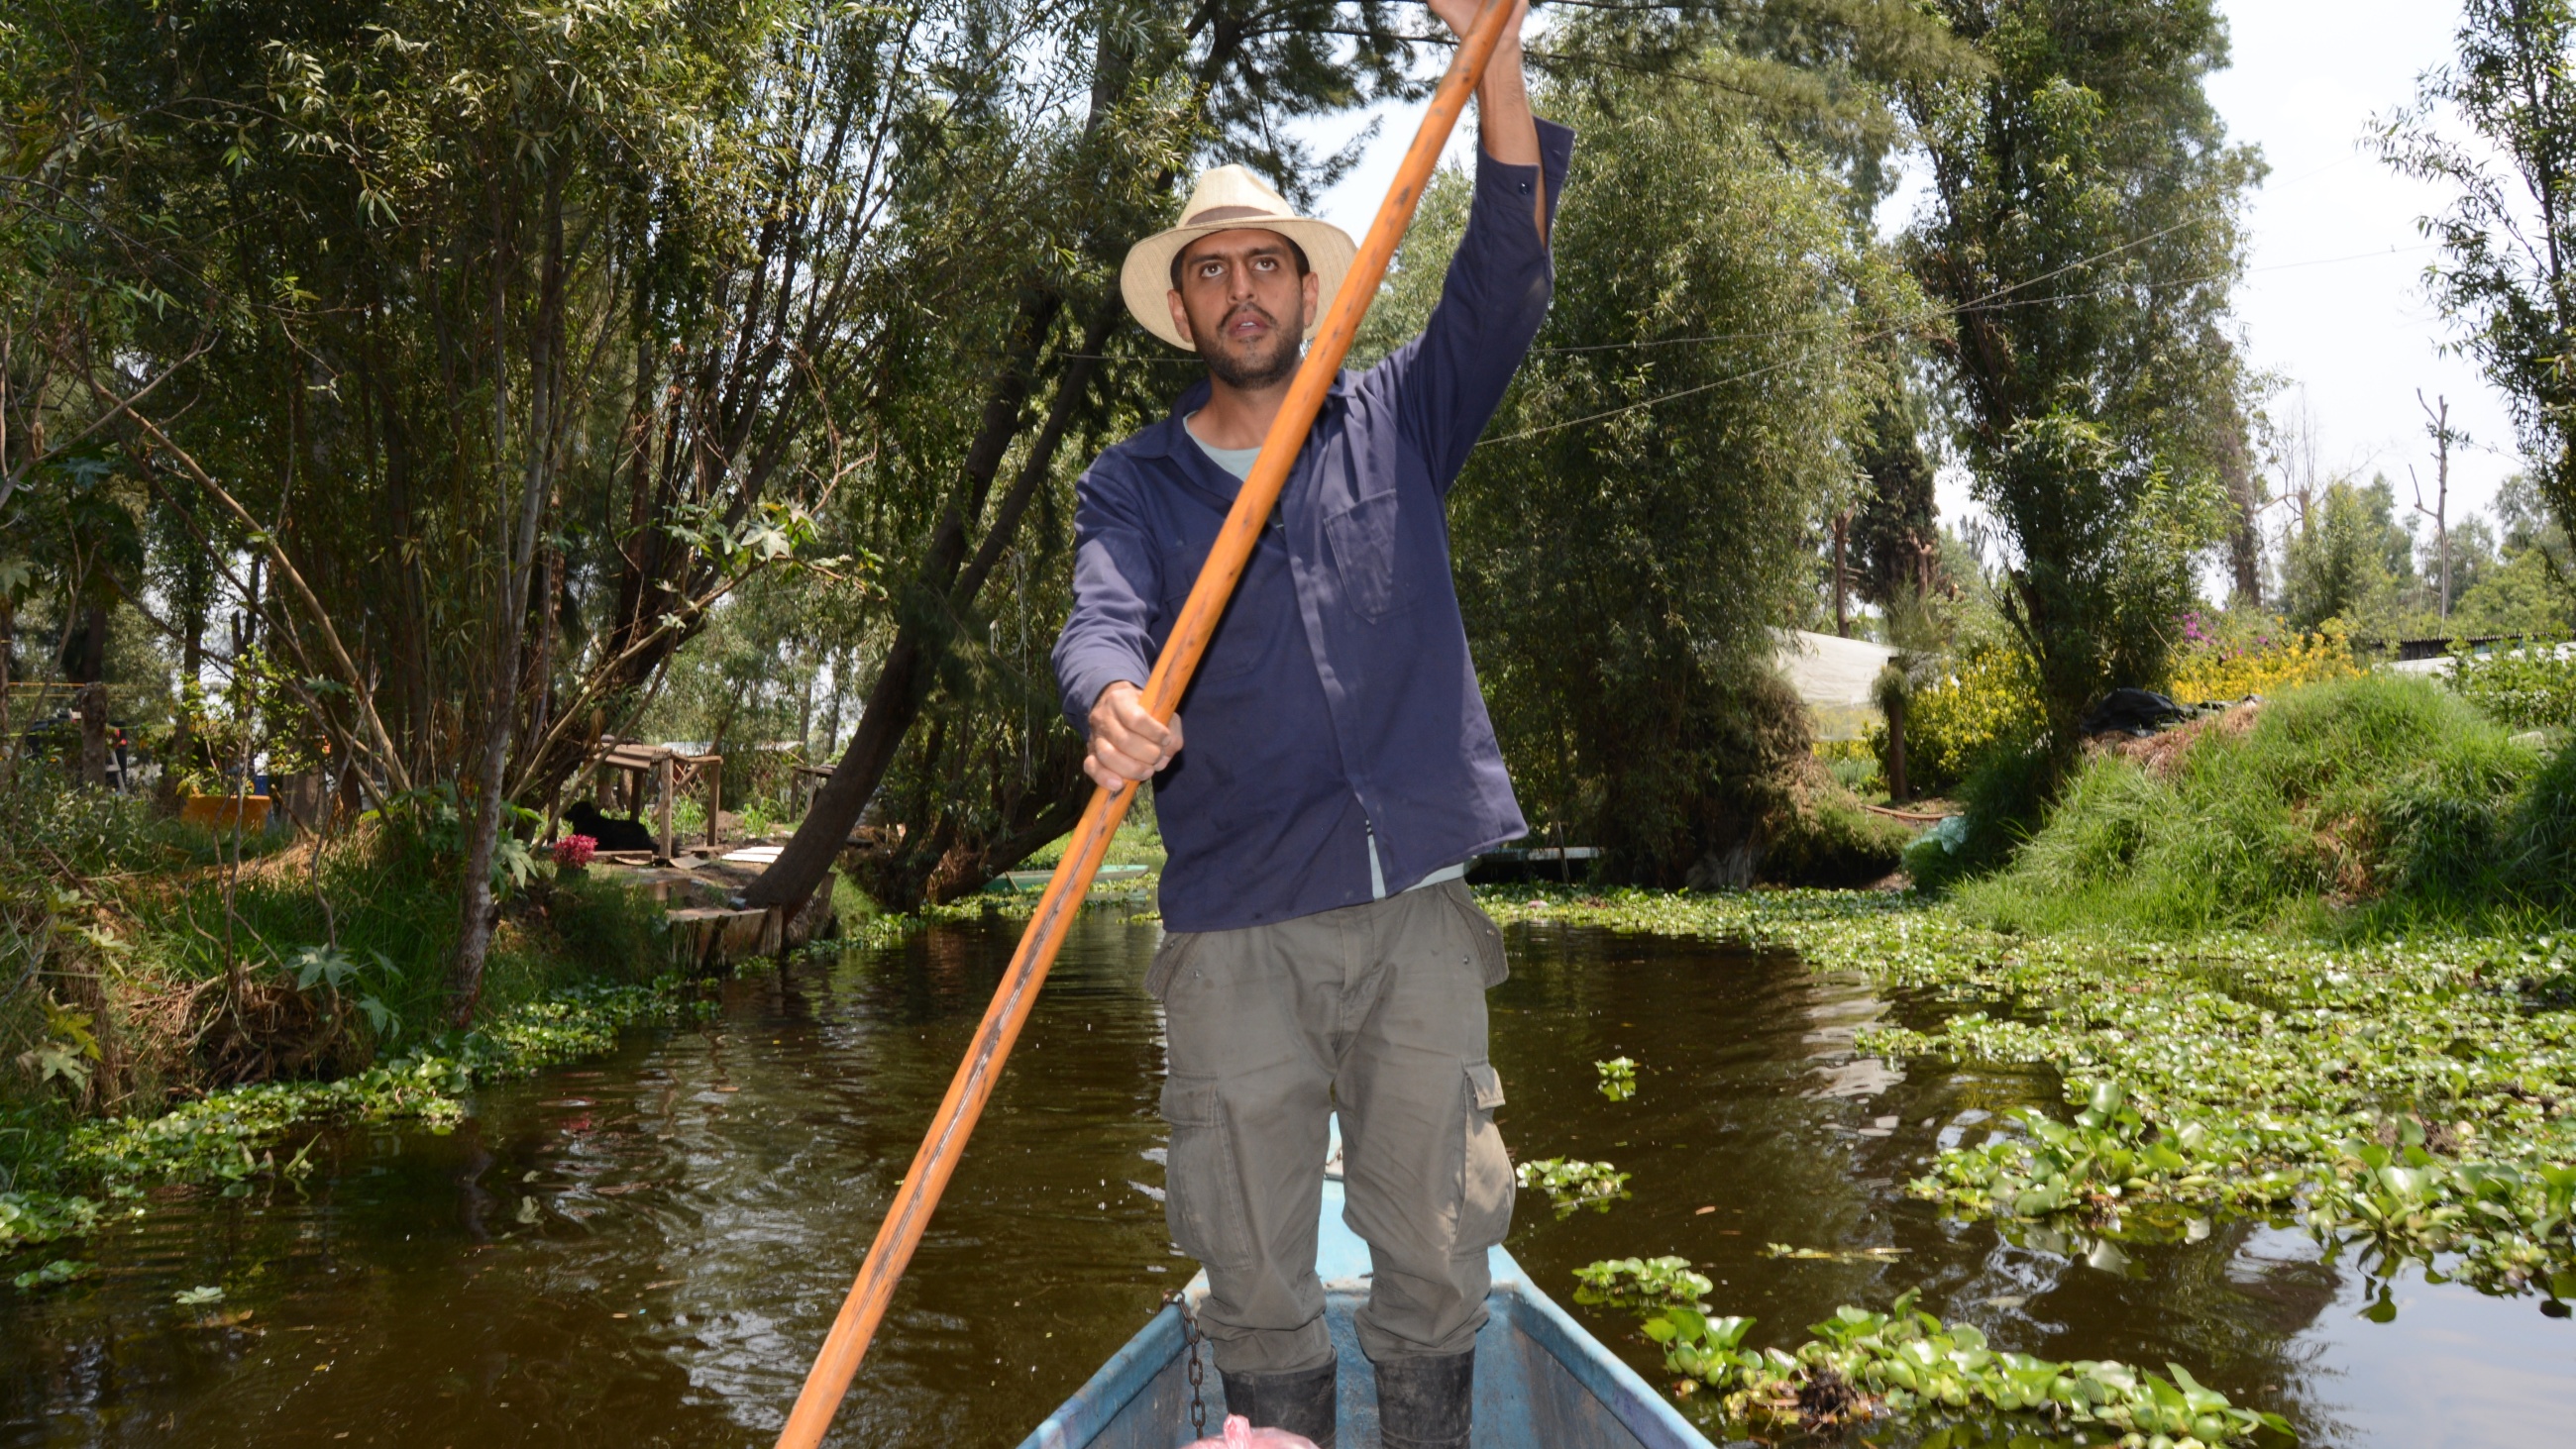 Carlos Sumano is one of the scientists from the National Autonomous University of Mexico working with Xochimilco farmers to restore canals and reactivate traditional chinampa farming.